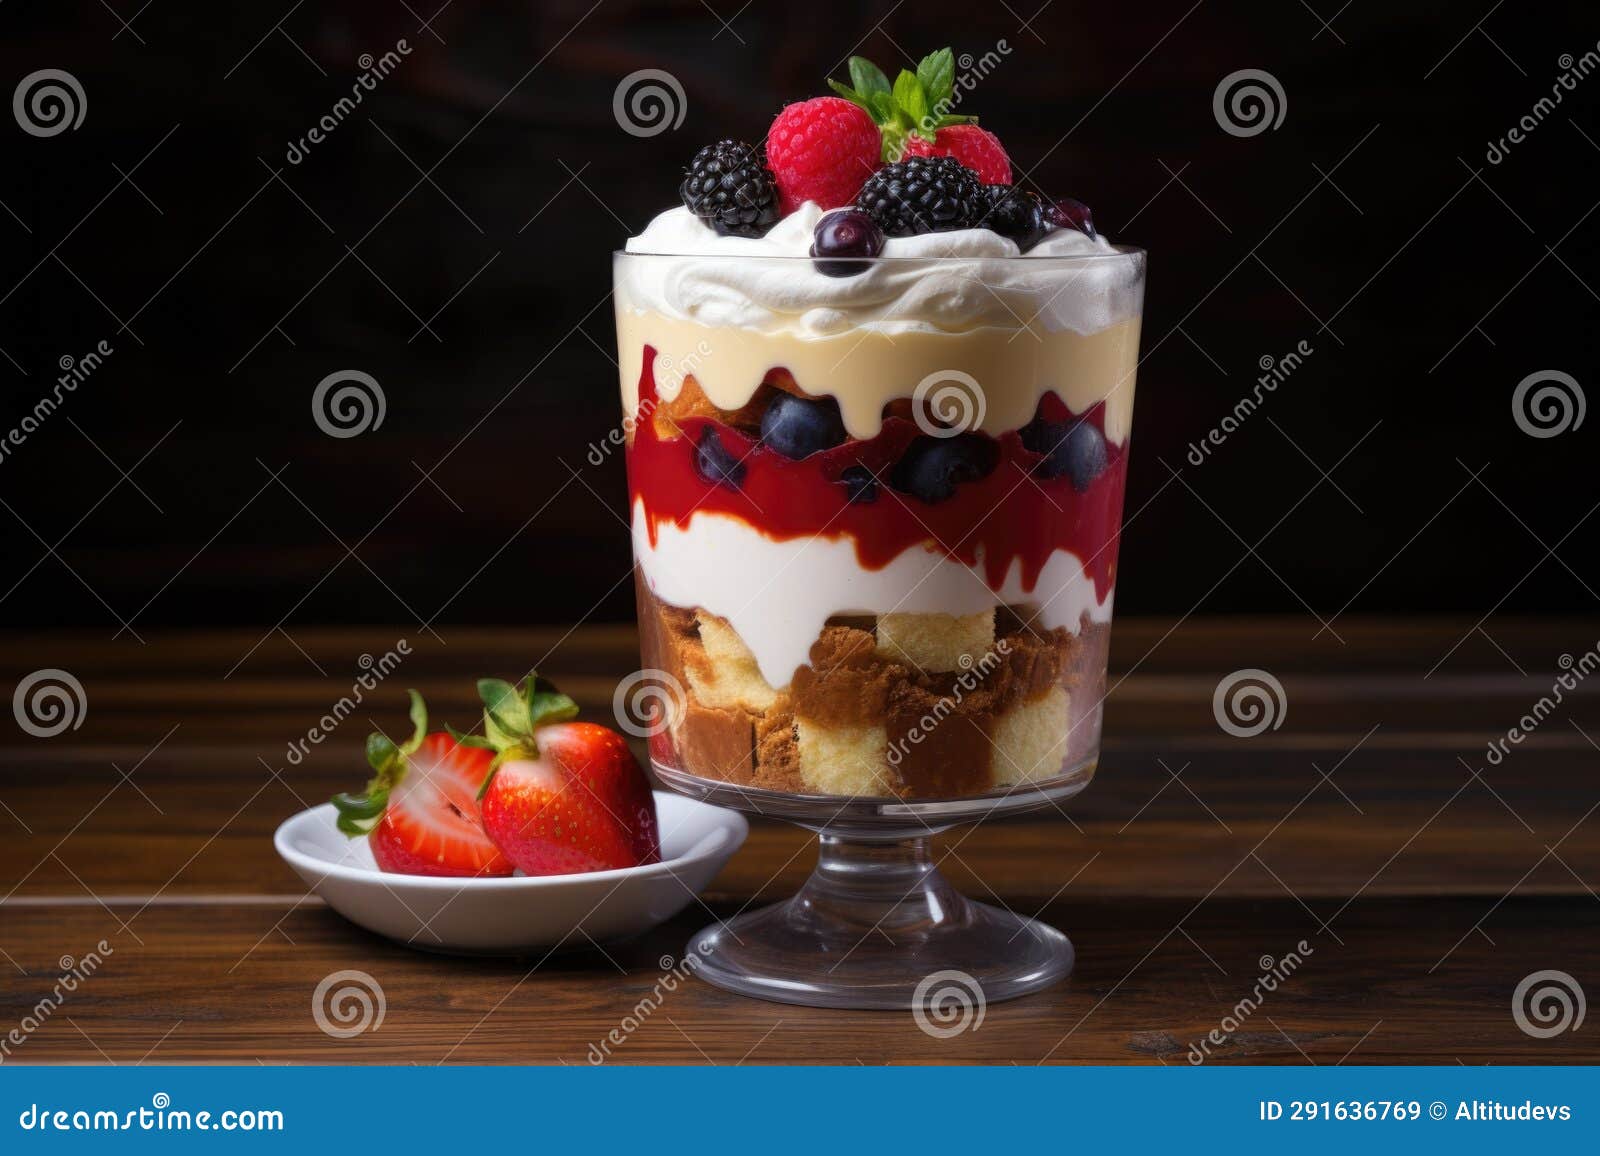 Layered Trifle with Whipped Cream and Berries Stock Image - Image of ...